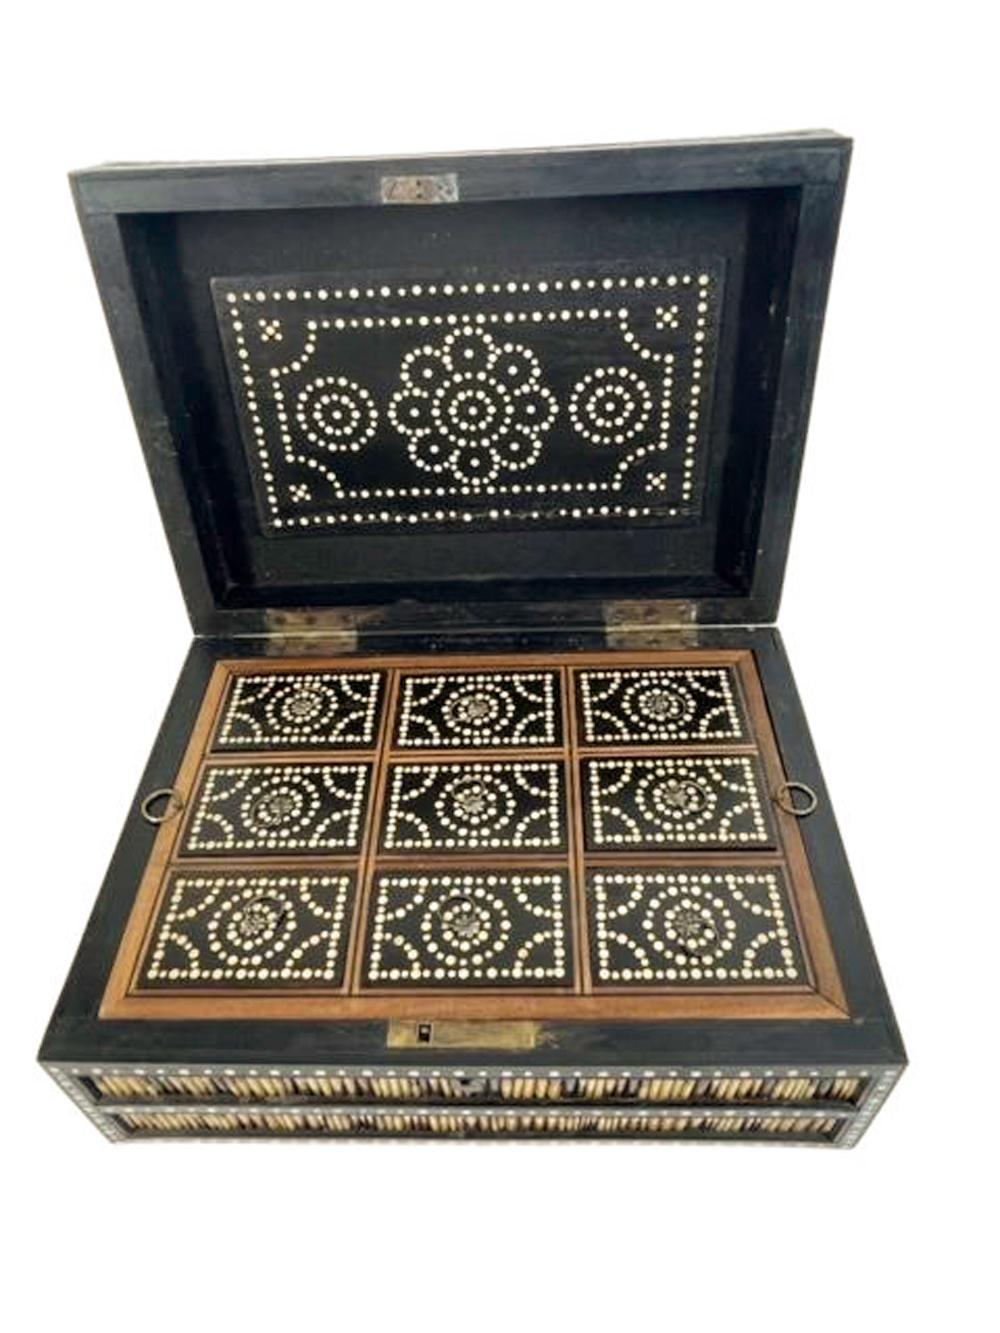 A large rectangular box made of dark hardwood inlaid with bone dots framing panels of porcupine quill. The exterior of the box is veneered with quill cut and arranged to create a zig-zag pattern using the light and dark areas of the quills. The